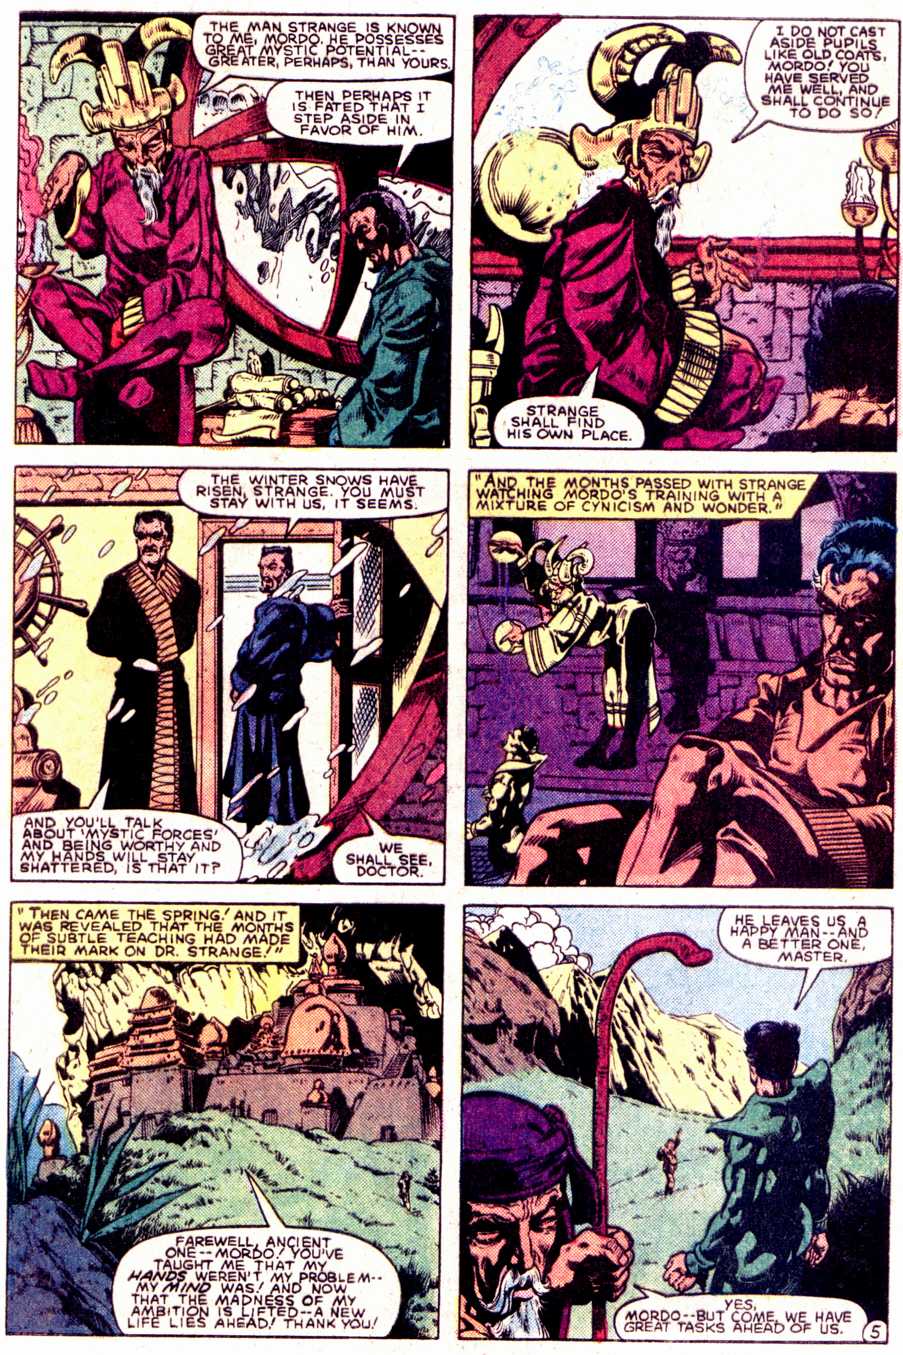 What If? (1977) issue 40 - Dr Strange had not become master of The mystic arts - Page 6